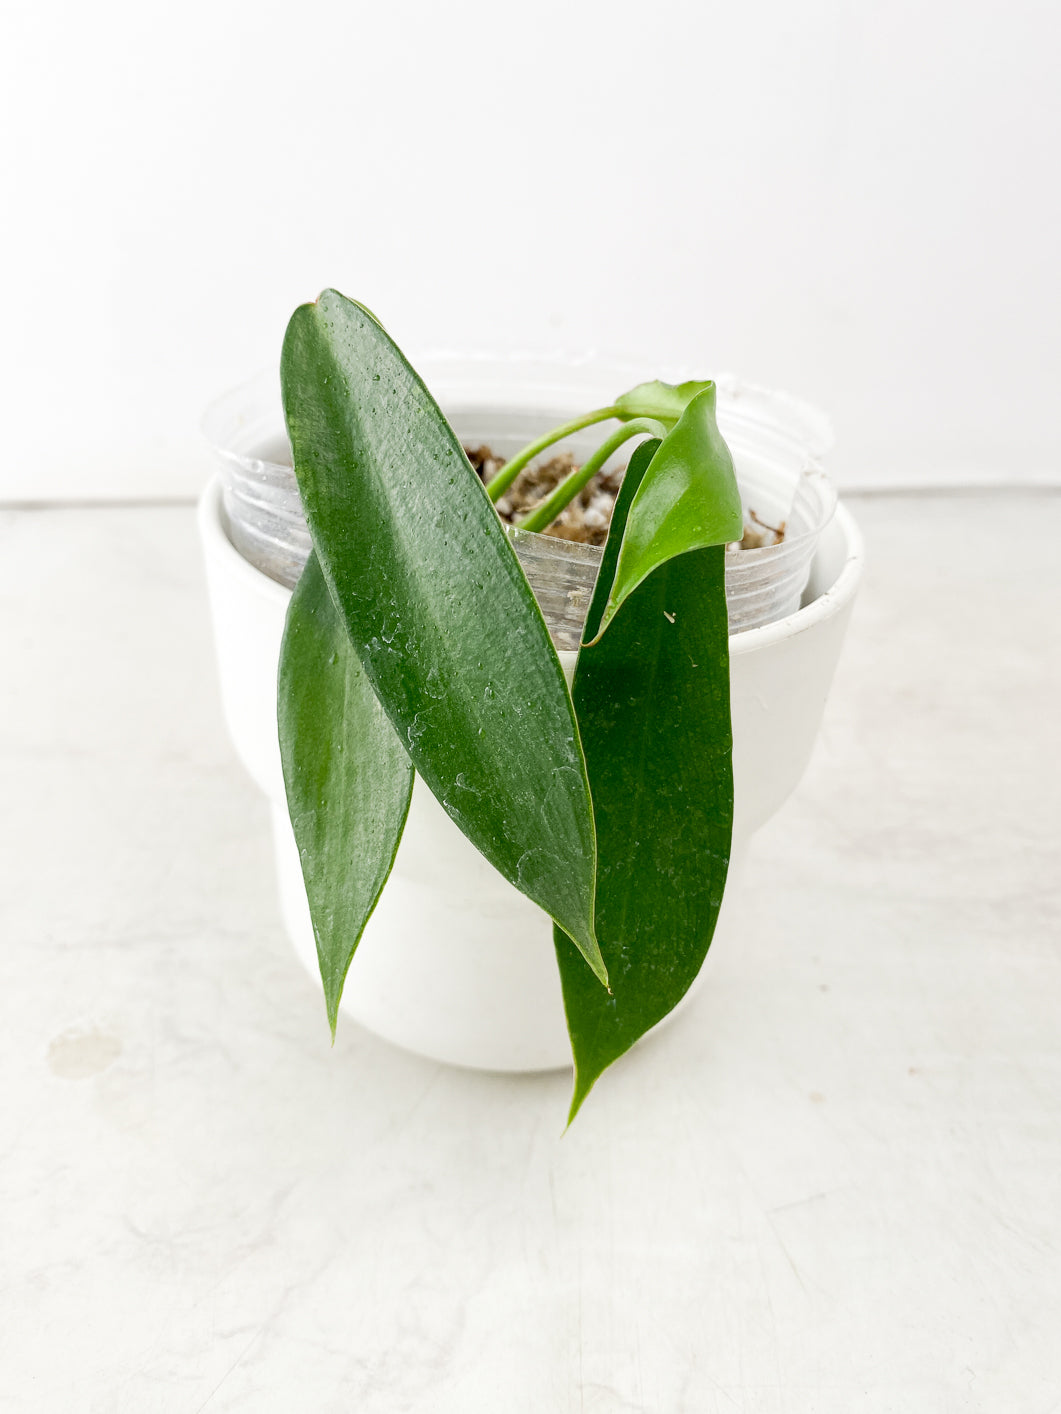 COMBO DEAL: Philodendron Florida Ghost Mint Variegated node and Philodendron Joepii